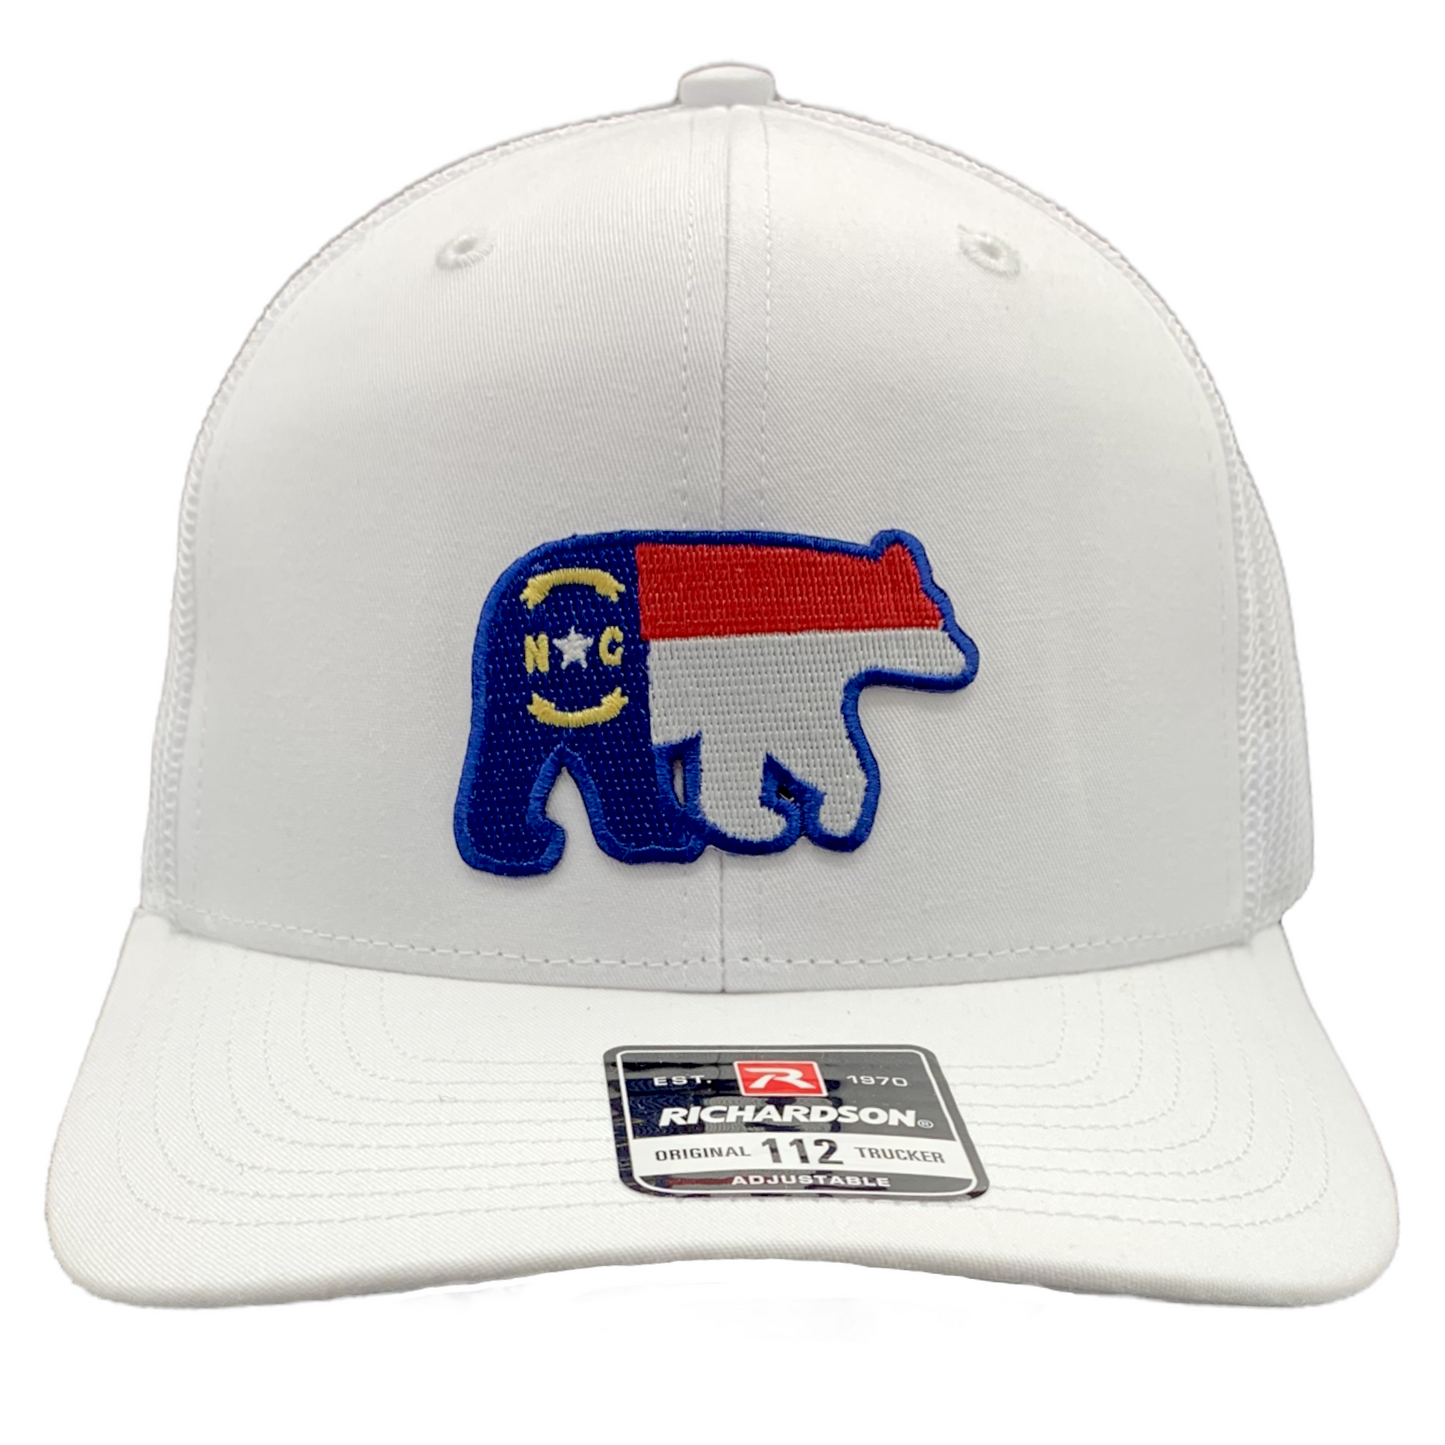 North Carolina Flag and Bear Silhouette Patch Trucker Baseball Hat in White - The ASHEVILLE Co. TM